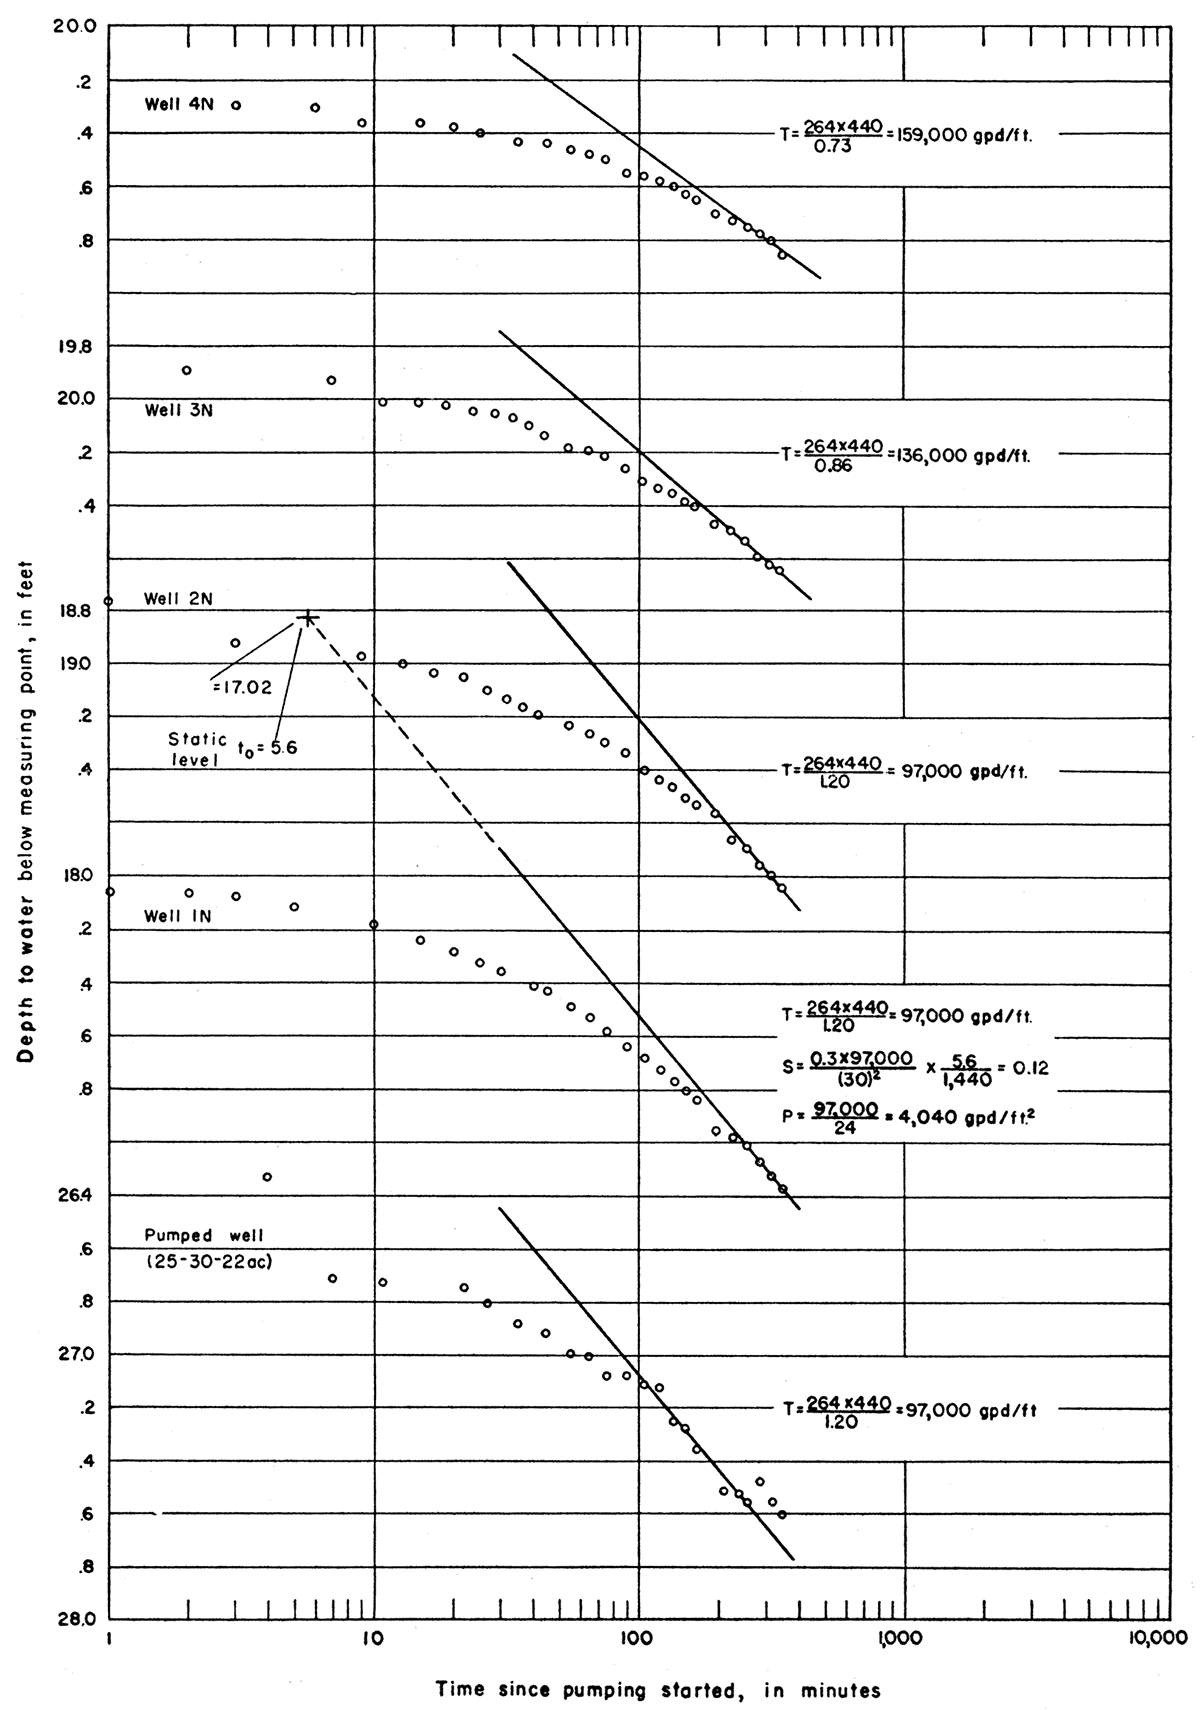 Depth to water measured in pumped well and observation wells during the Ven John aquifer test plotted against time since pumping started.